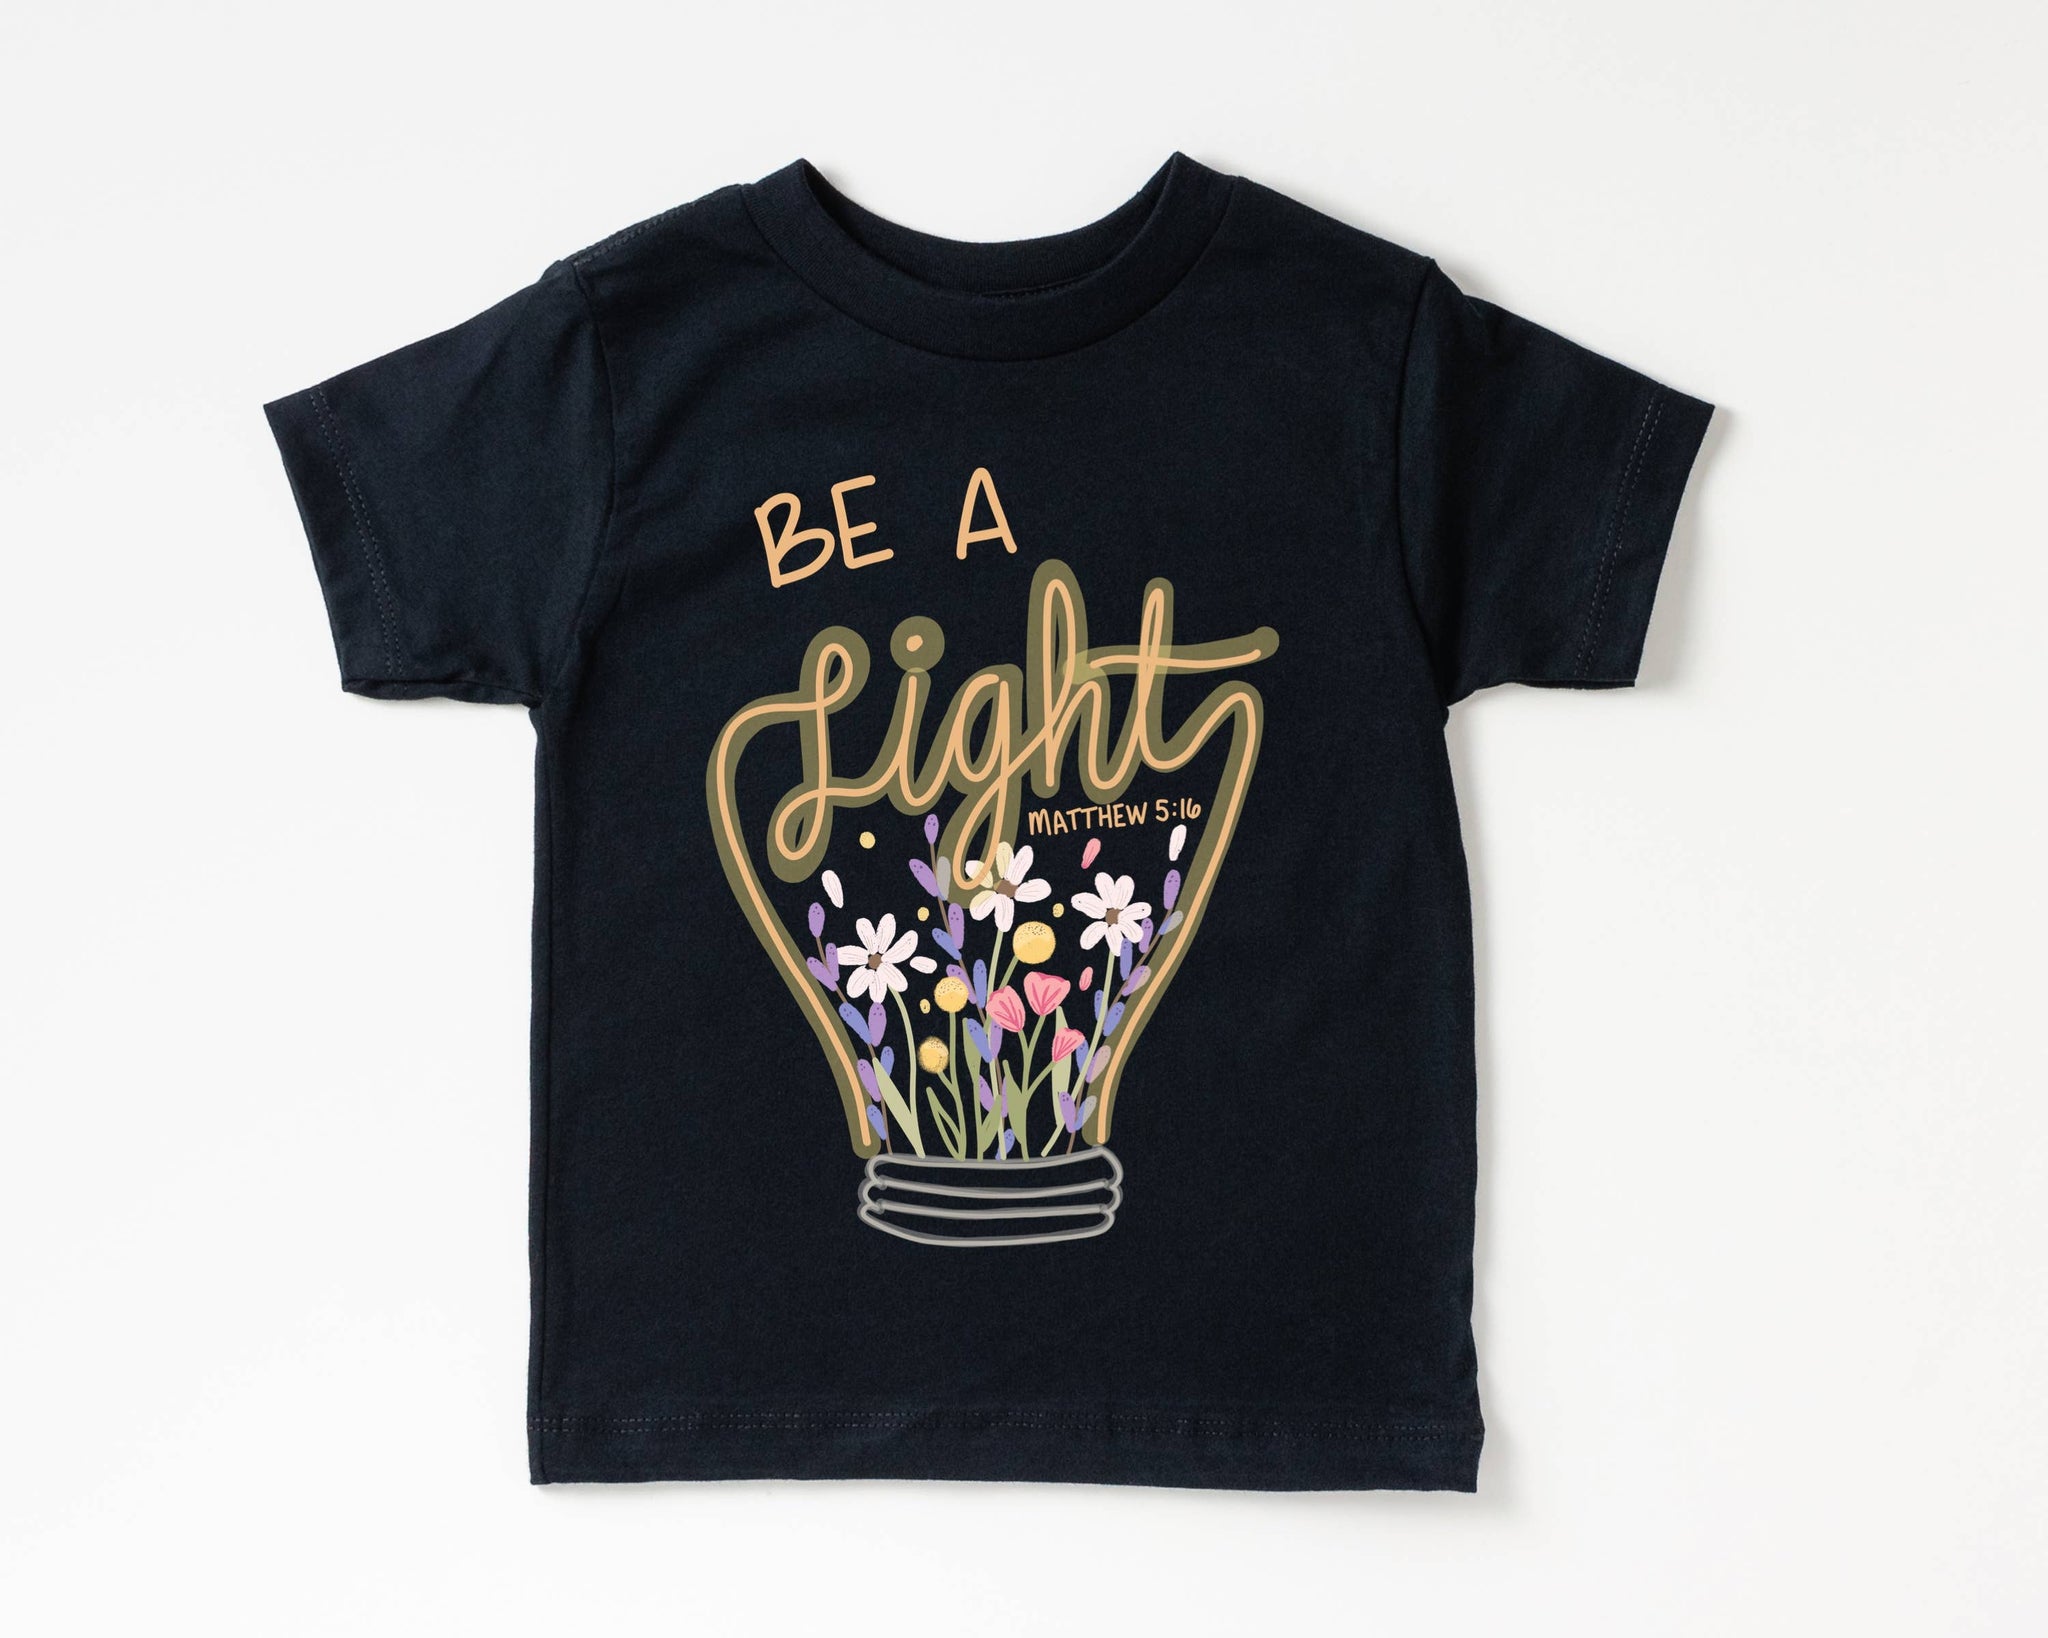 Be A Light Graphic Tee